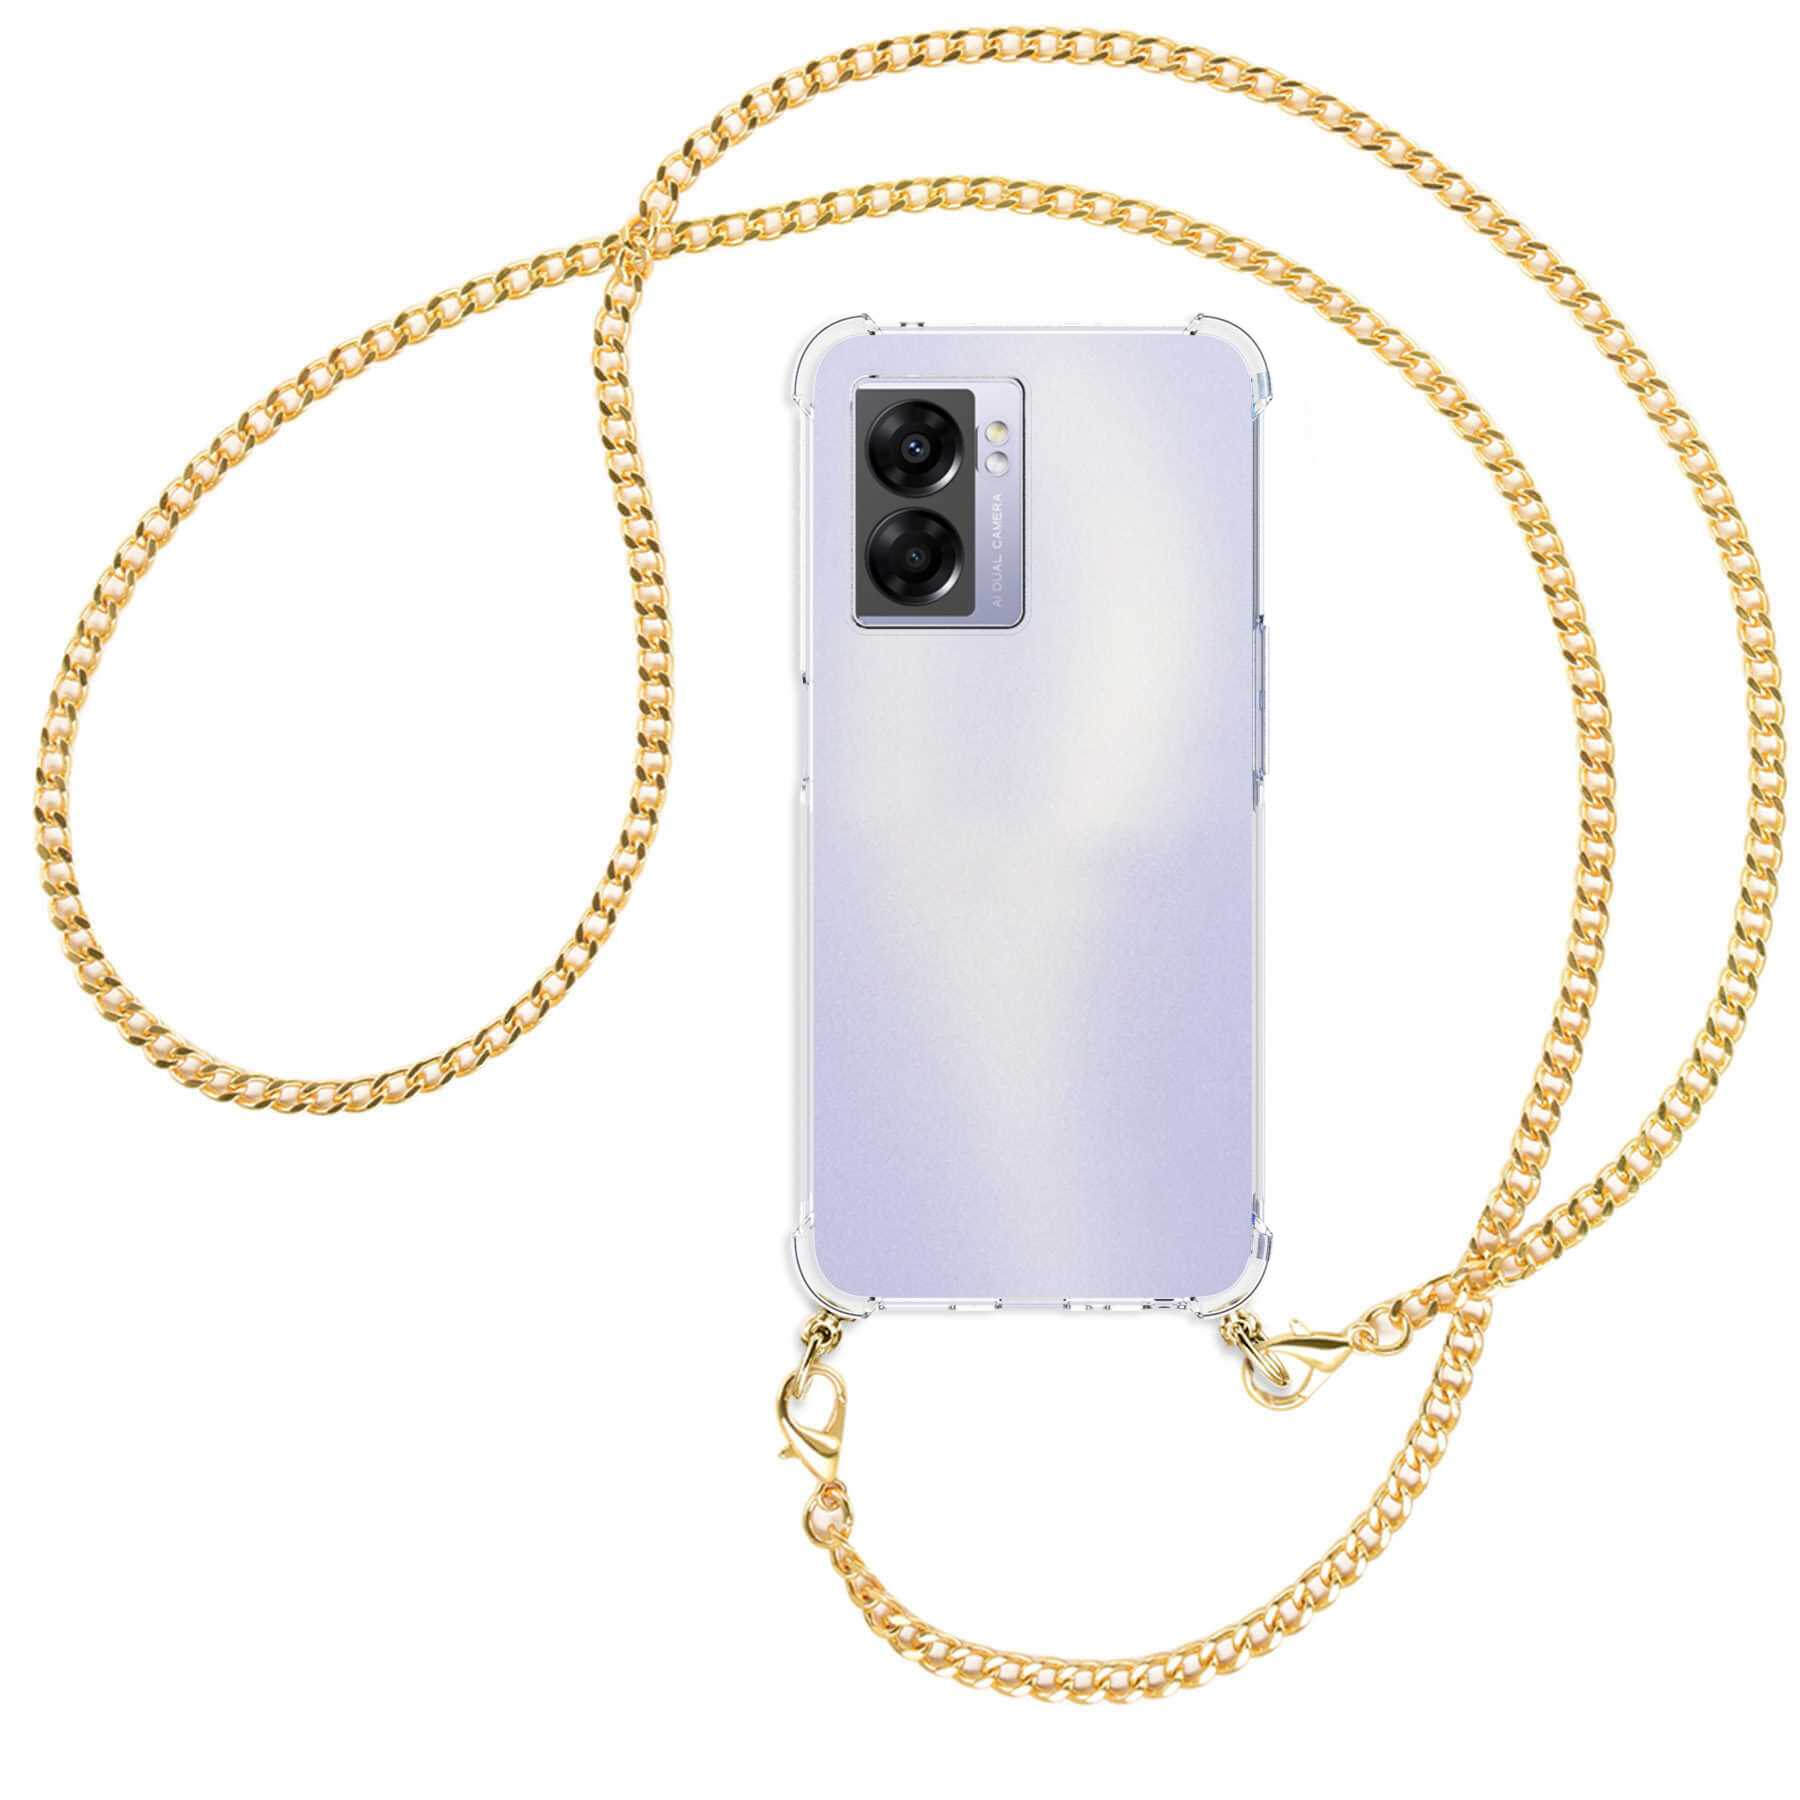 MTB MORE ENERGY Realme Narzo mit A77 5G, (gold) Kette Umhänge-Hülle Oppo, A57 Backcover, 5G, 5G, Metallkette, 50